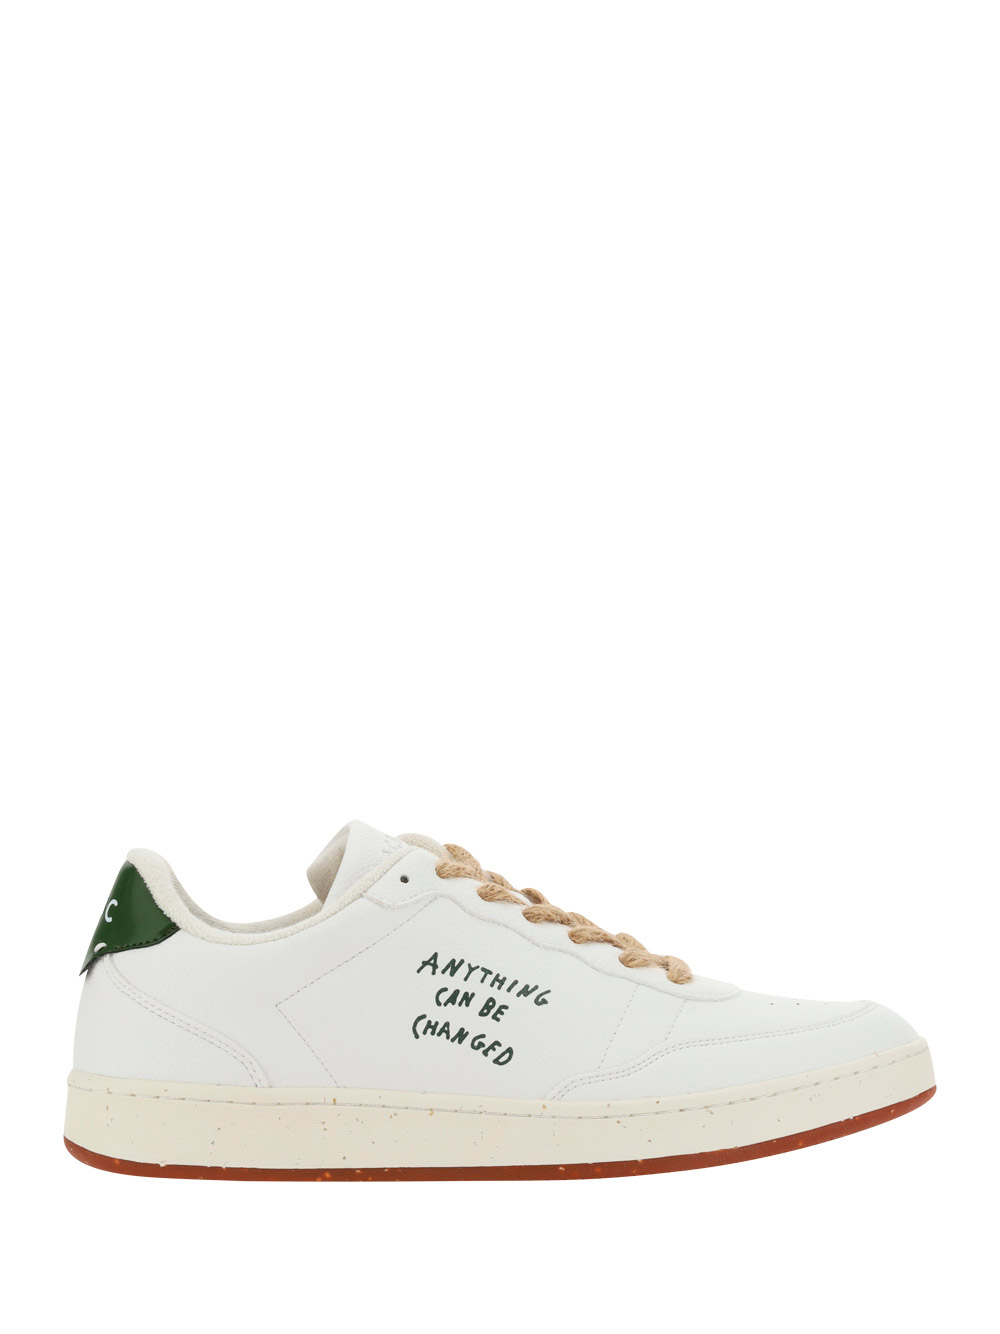 Acbc Sneakers In White/green Cactus